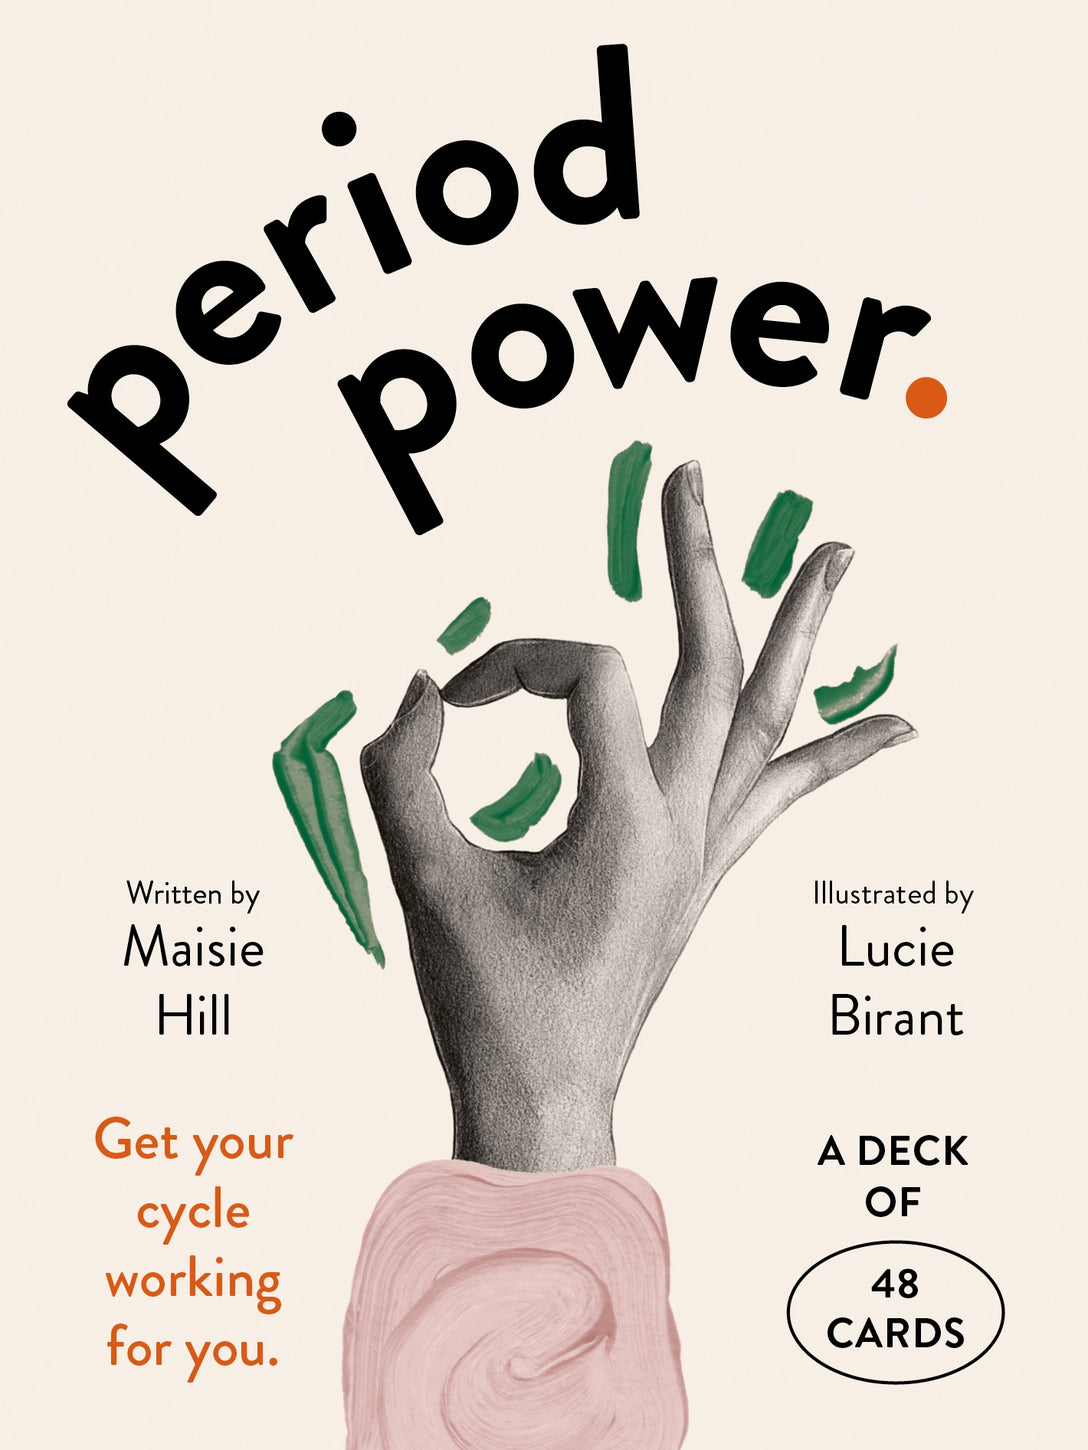 Period Power Cards by Lucie Birant, Maisie Hill